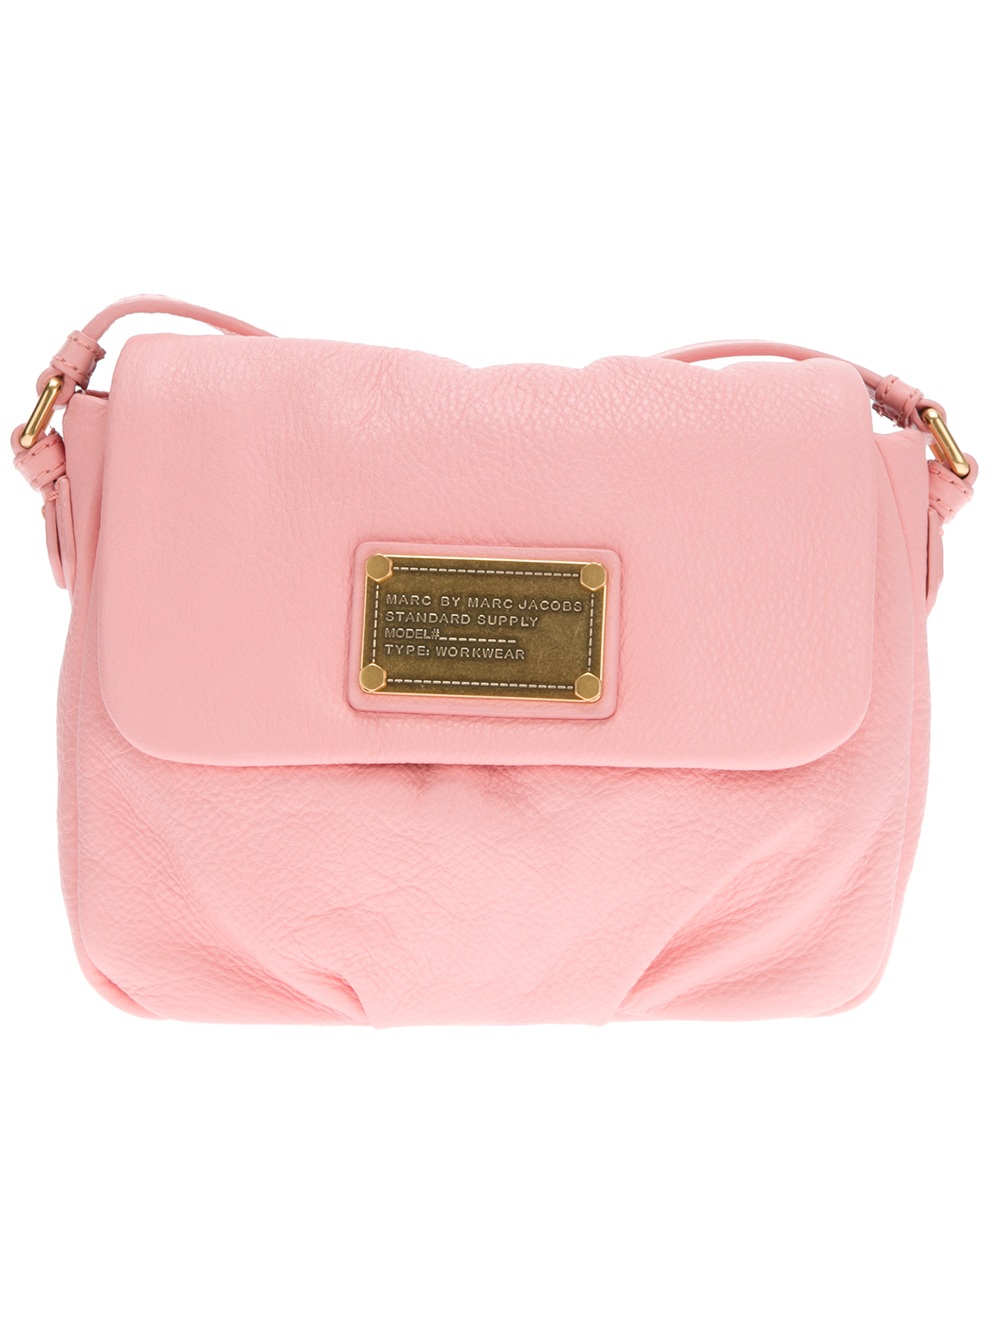 Marc By Marc Jacobs Cross Body Bag in Pink - Lyst